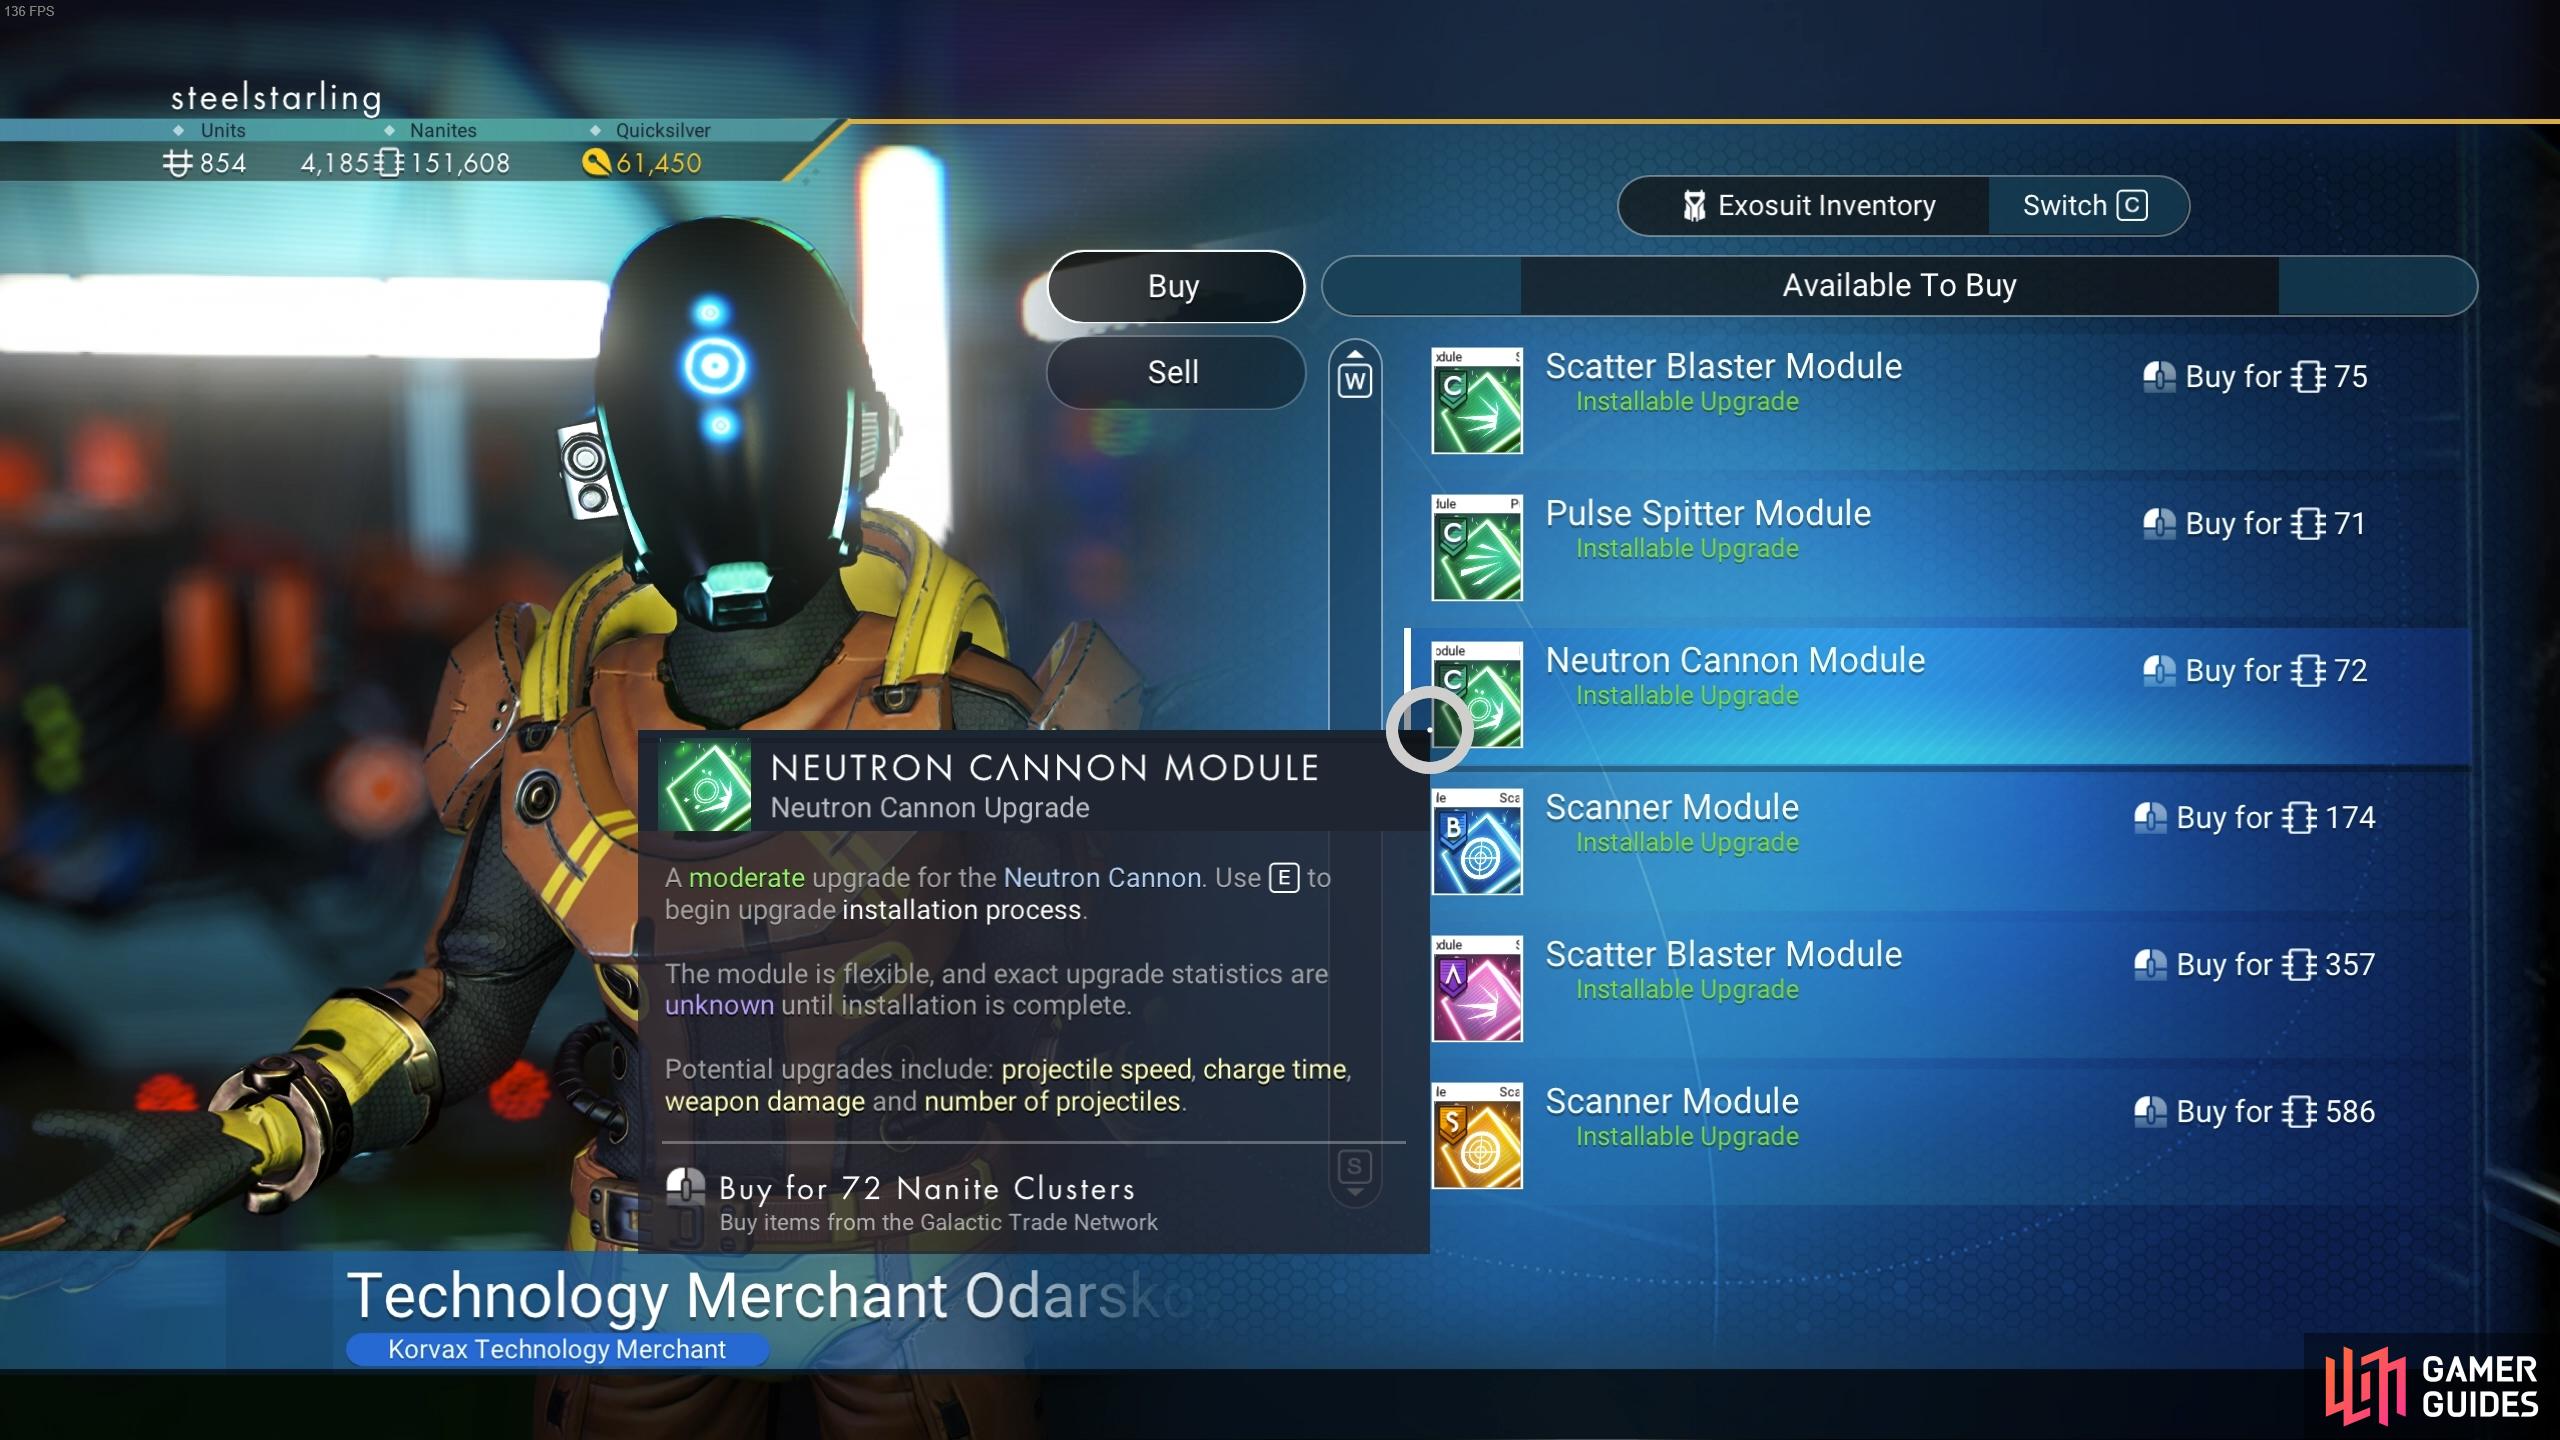 You can purchase numerous Multi-Tool upgrades at the merchant on space stations.